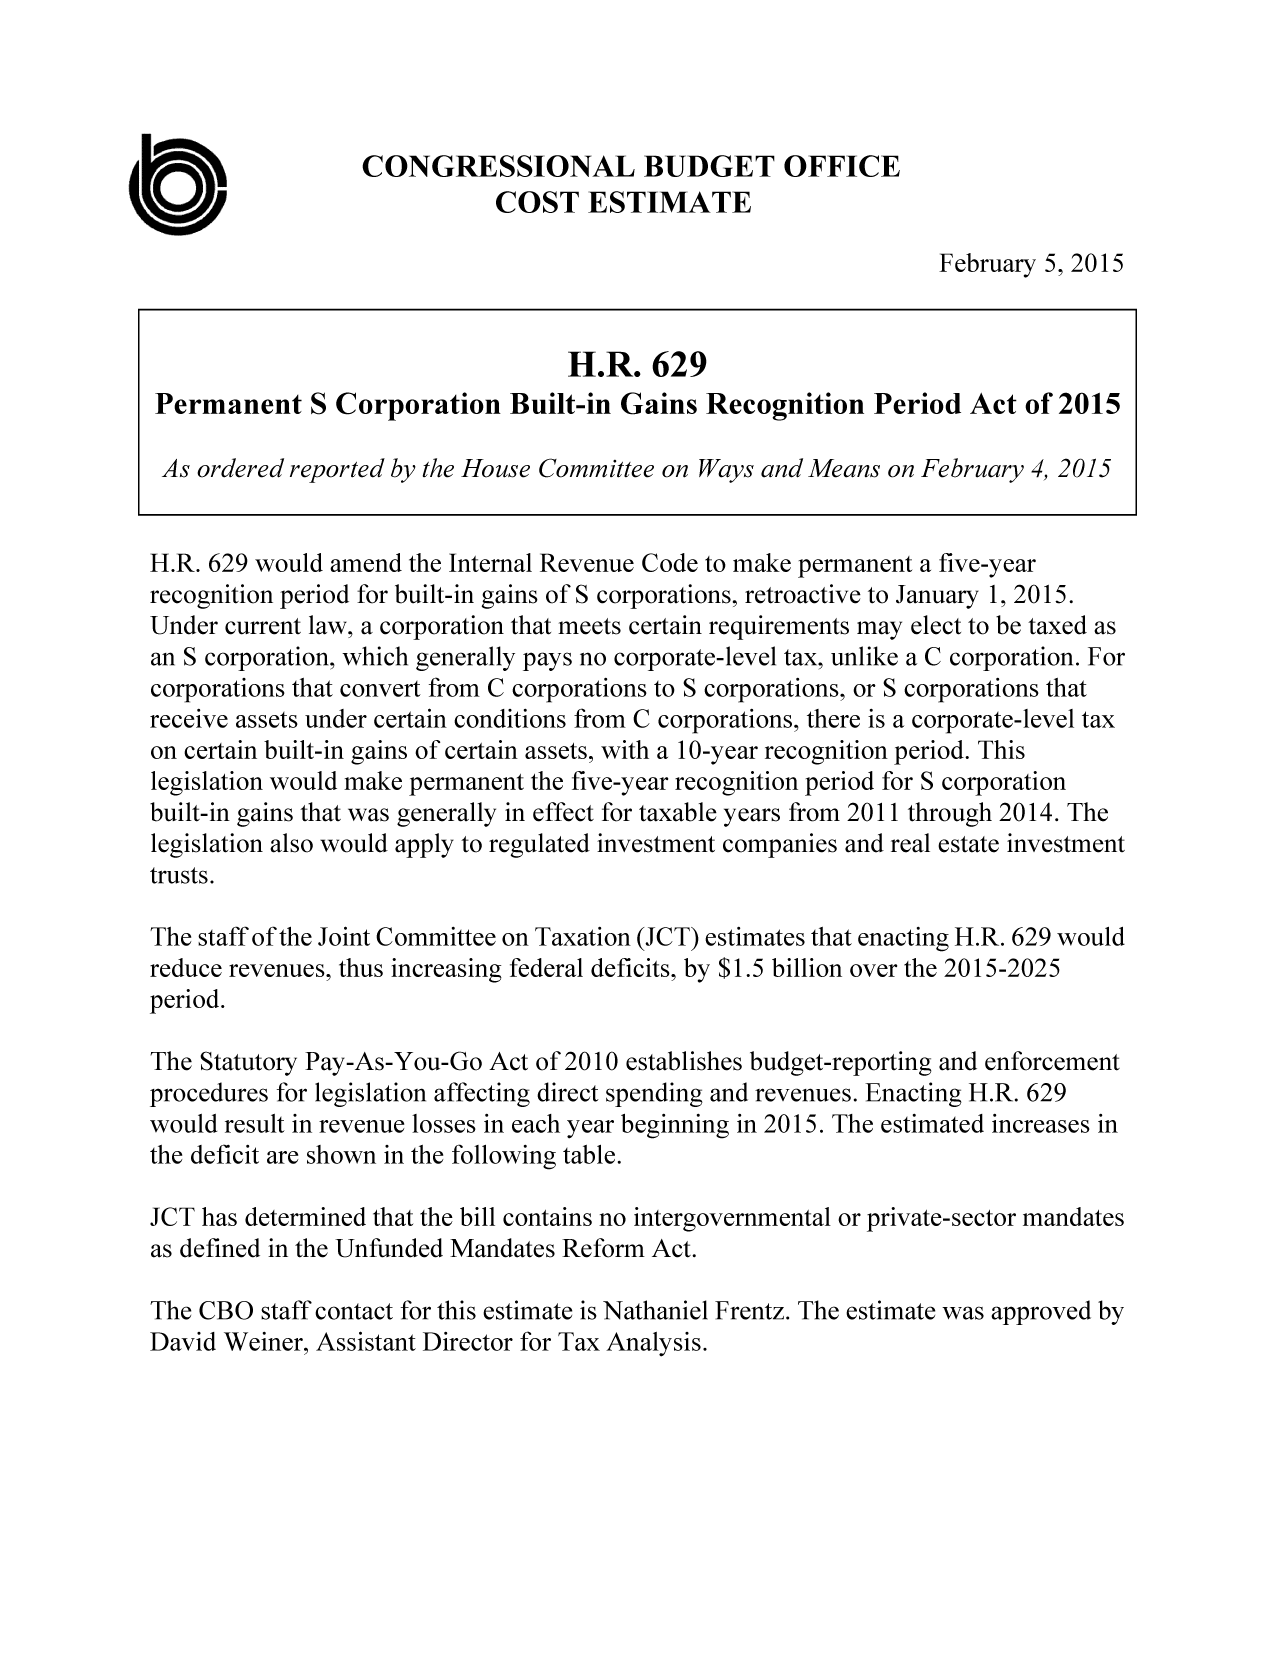 handle is hein.congrec/cbo2058 and id is 1 raw text is: tCONGRESSIONAL BUDGET OFFICE
ci                        COST ESTIMATE
February 5, 2015
H.R. 629
Permanent S Corporation Built-in Gains Recognition Period Act of 2015
As ordered reported by the House Committee on Ways and Means on February 4, 2015
H.R. 629 would amend the Internal Revenue Code to make permanent a five-year
recognition period for built-in gains of S corporations, retroactive to January 1, 2015.
Under current law, a corporation that meets certain requirements may elect to be taxed as
an S corporation, which generally pays no corporate-level tax, unlike a C corporation. For
corporations that convert from C corporations to S corporations, or S corporations that
receive assets under certain conditions from C corporations, there is a corporate-level tax
on certain built-in gains of certain assets, with a 10-year recognition period. This
legislation would make permanent the five-year recognition period for S corporation
built-in gains that was generally in effect for taxable years from 2011 through 2014. The
legislation also would apply to regulated investment companies and real estate investment
trusts.
The staff of the Joint Committee on Taxation (JCT) estimates that enacting H.R. 629 would
reduce revenues, thus increasing federal deficits, by $1.5 billion over the 2015-2025
period.
The Statutory Pay-As-You-Go Act of 2010 establishes budget-reporting and enforcement
procedures for legislation affecting direct spending and revenues. Enacting H.R. 629
would result in revenue losses in each year beginning in 2015. The estimated increases in
the deficit are shown in the following table.
JCT has determined that the bill contains no intergovernmental or private-sector mandates
as defined in the Unfunded Mandates Reform Act.
The CBO staff contact for this estimate is Nathaniel Frentz. The estimate was approved by
David Weiner, Assistant Director for Tax Analysis.


